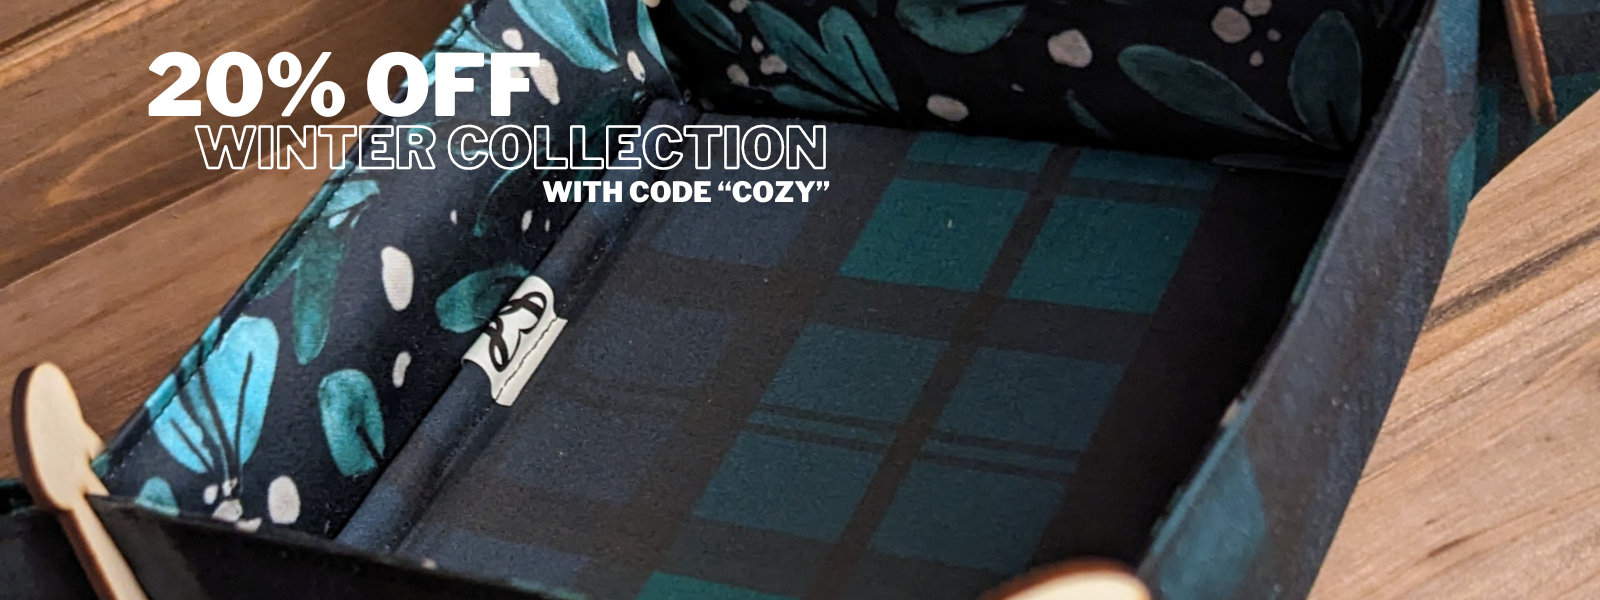 A dice tray with green and blue plaid and white mistletoe print fabric with writing saying 20% off Winter Collection with code "cozy".